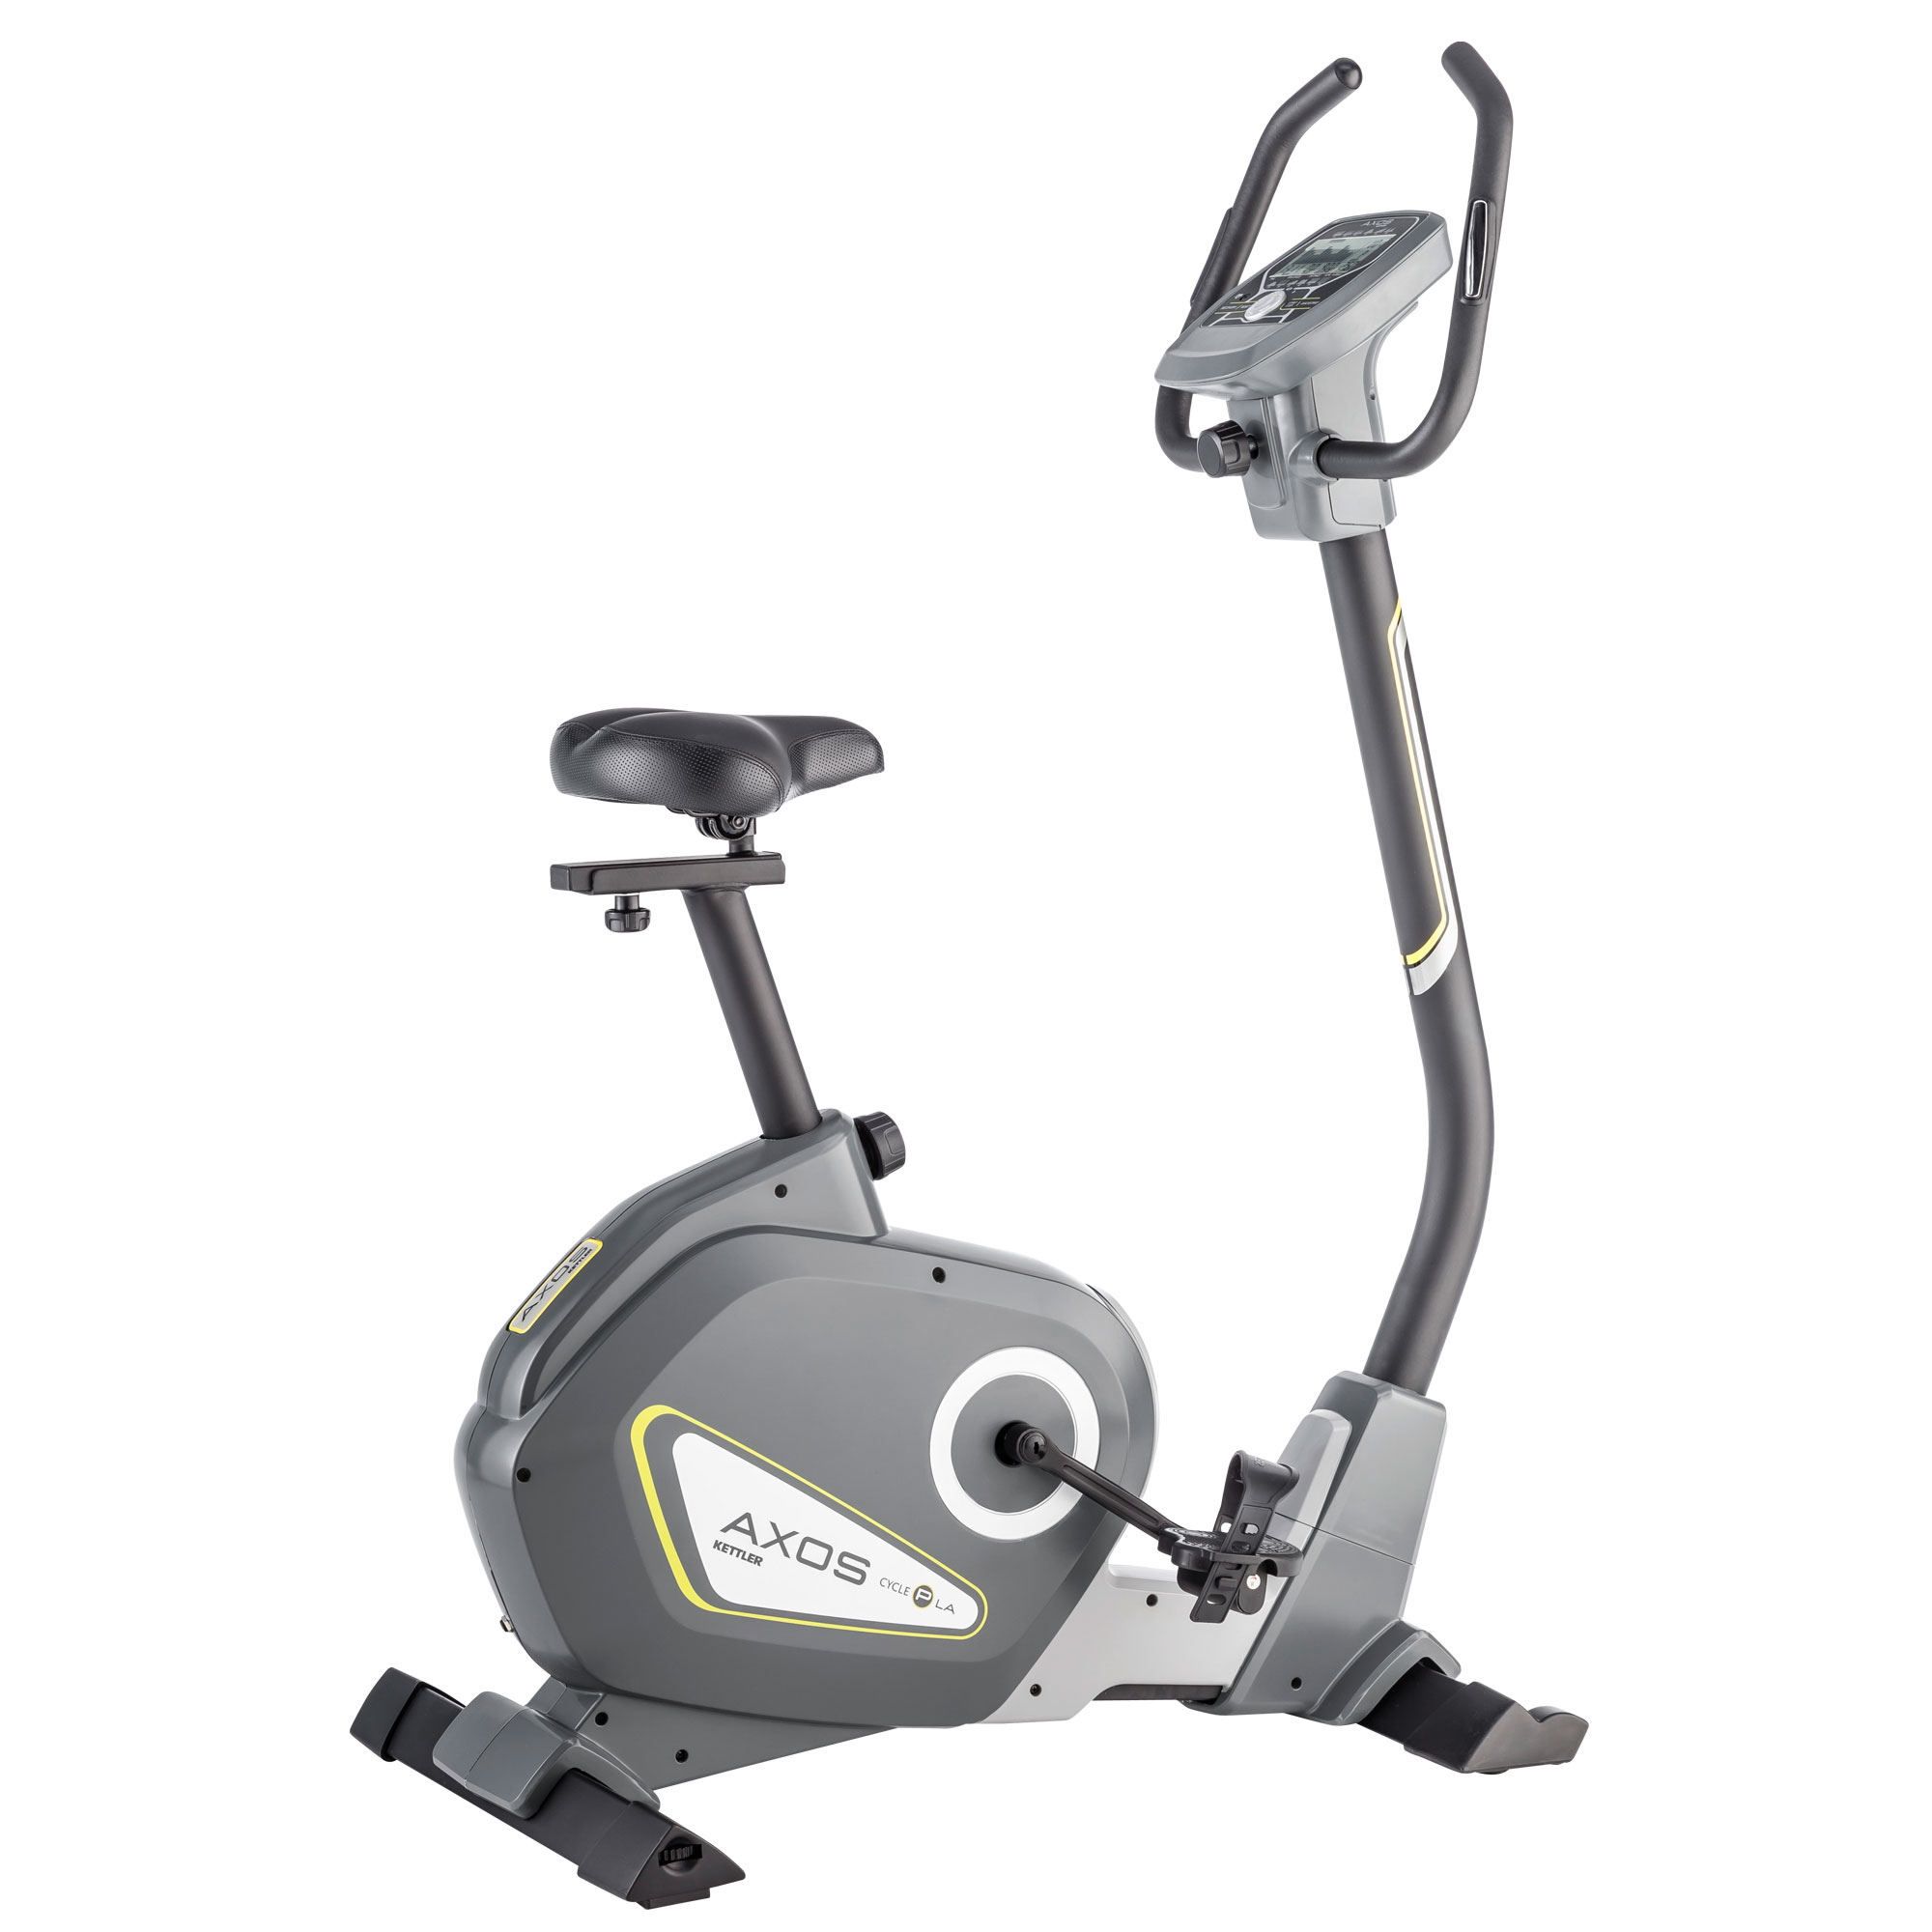 Exercise bike - with easy access from -